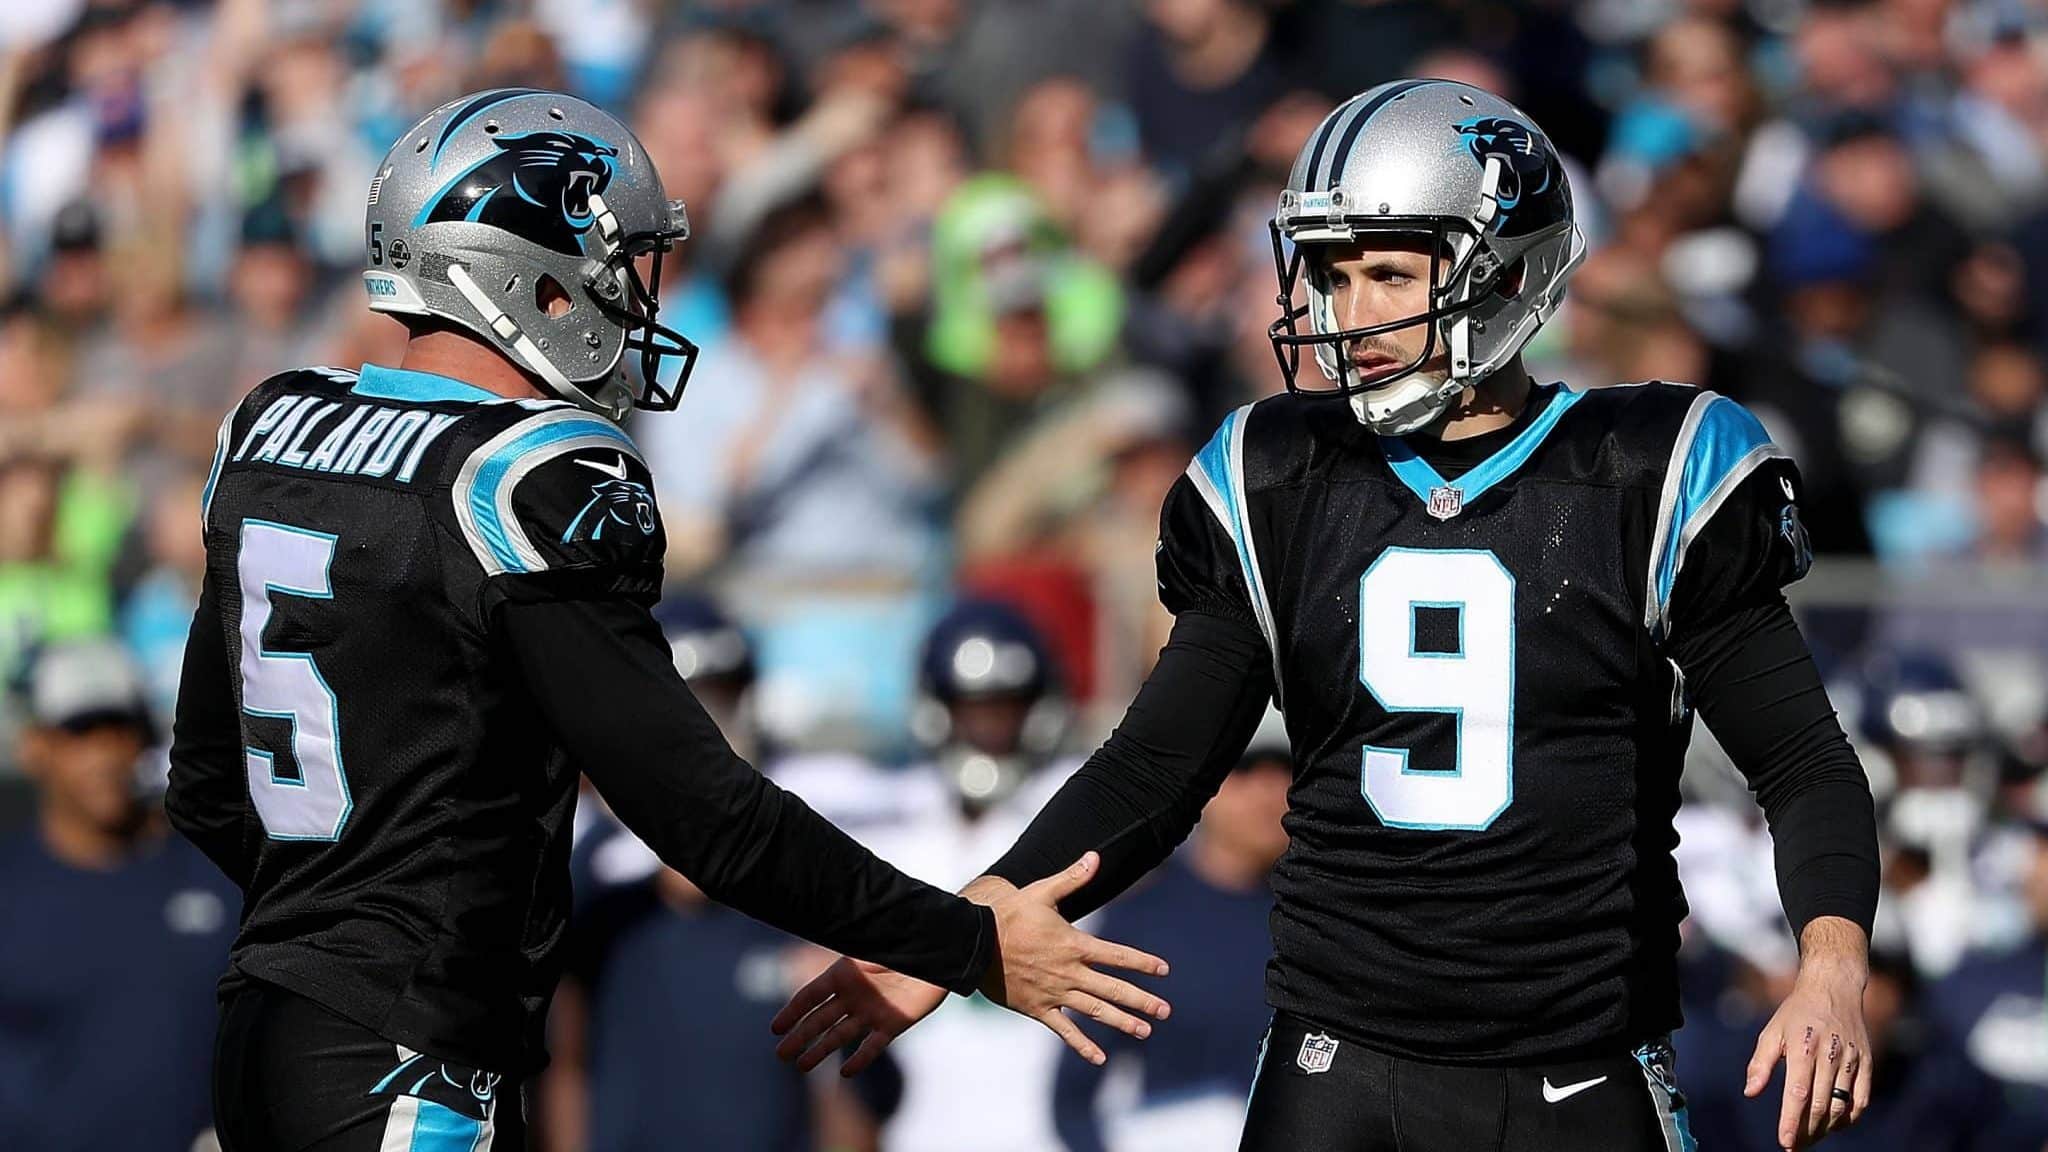 CHARLOTTE, NC - NOVEMBER 25: Graham Gano #9 and teammate Michael Palardy #5 of the Carolina Panthers react after a field goal against the Seattle Seahawks in the second quarter during their game at Bank of America Stadium on November 25, 2018 in Charlotte, North Carolina.